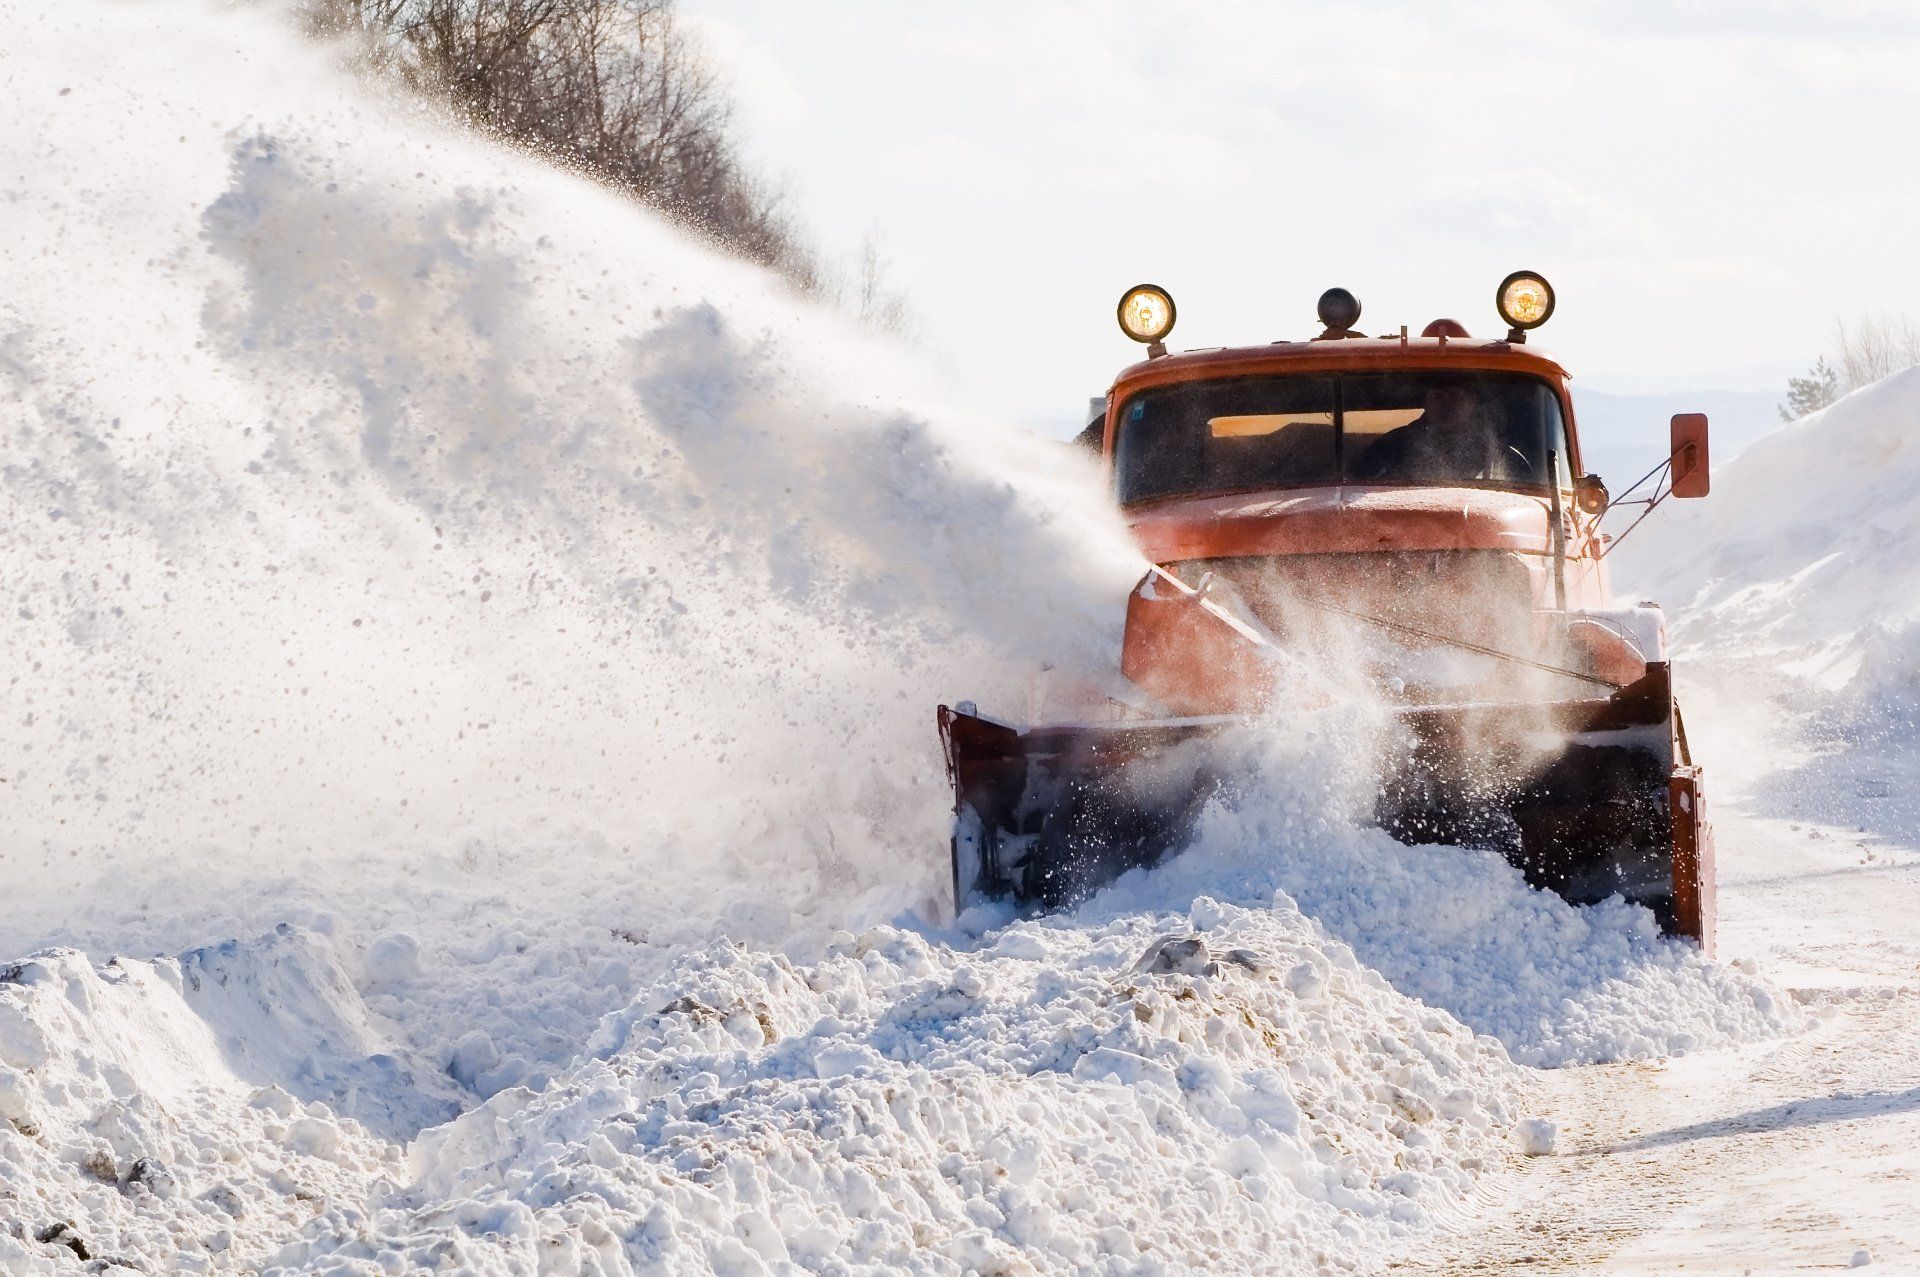 Snow Removal and Snow Blowing Service